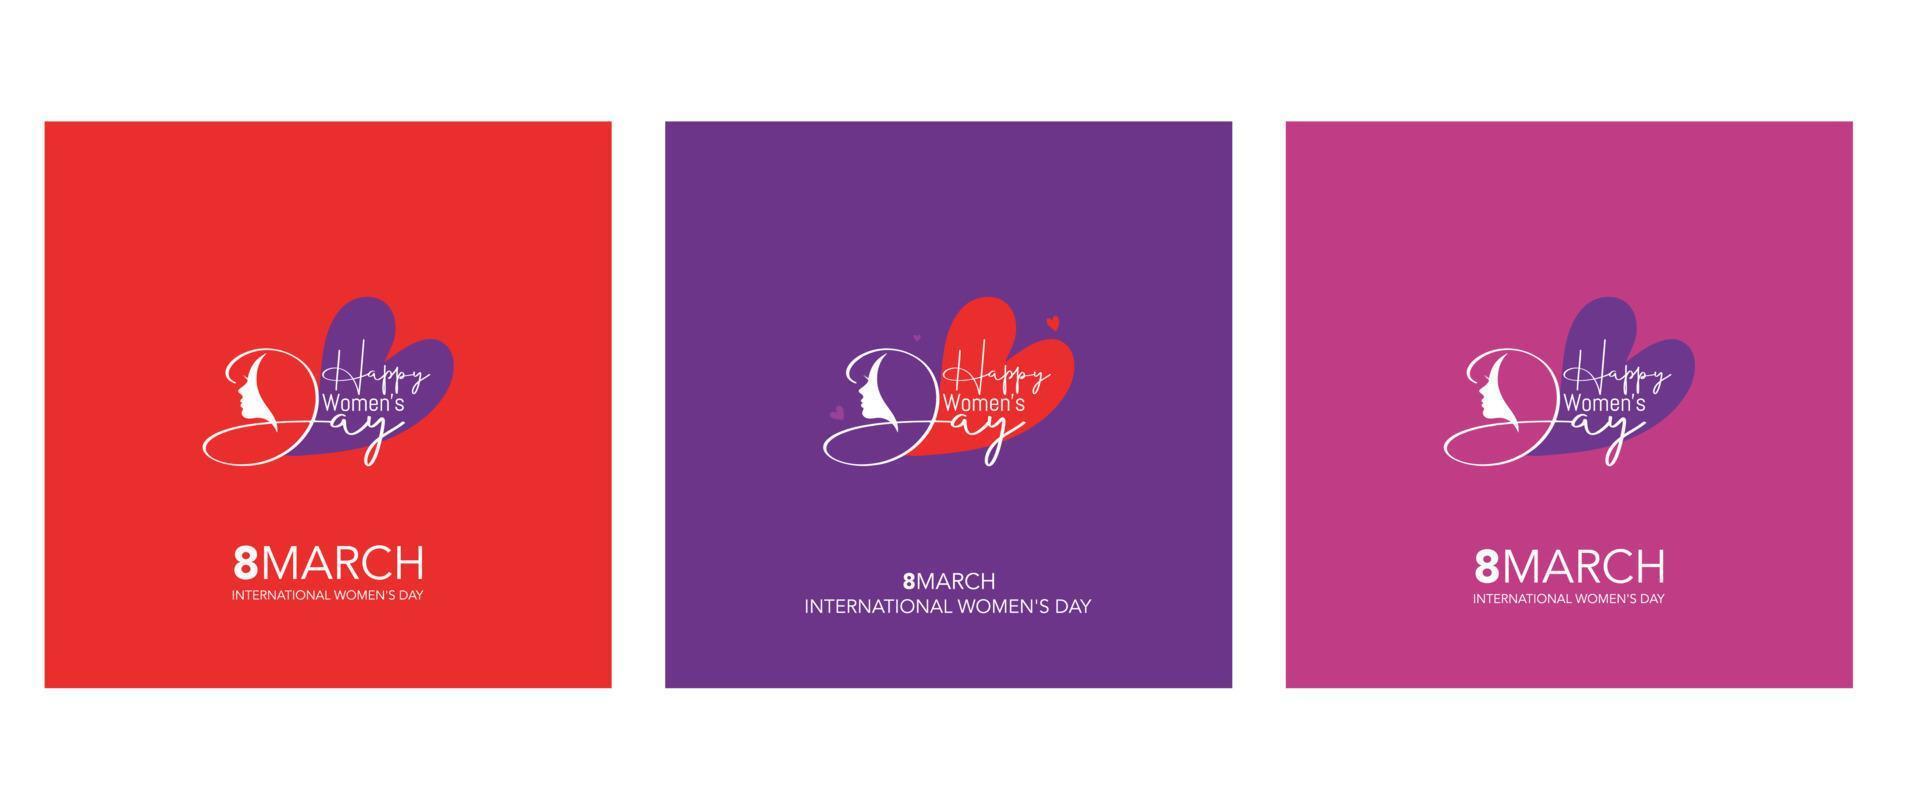 International women's day concept poster. Woman sign illustration background. 2023 women's day campaign theme-Accelerating Equality and Empowerment vector